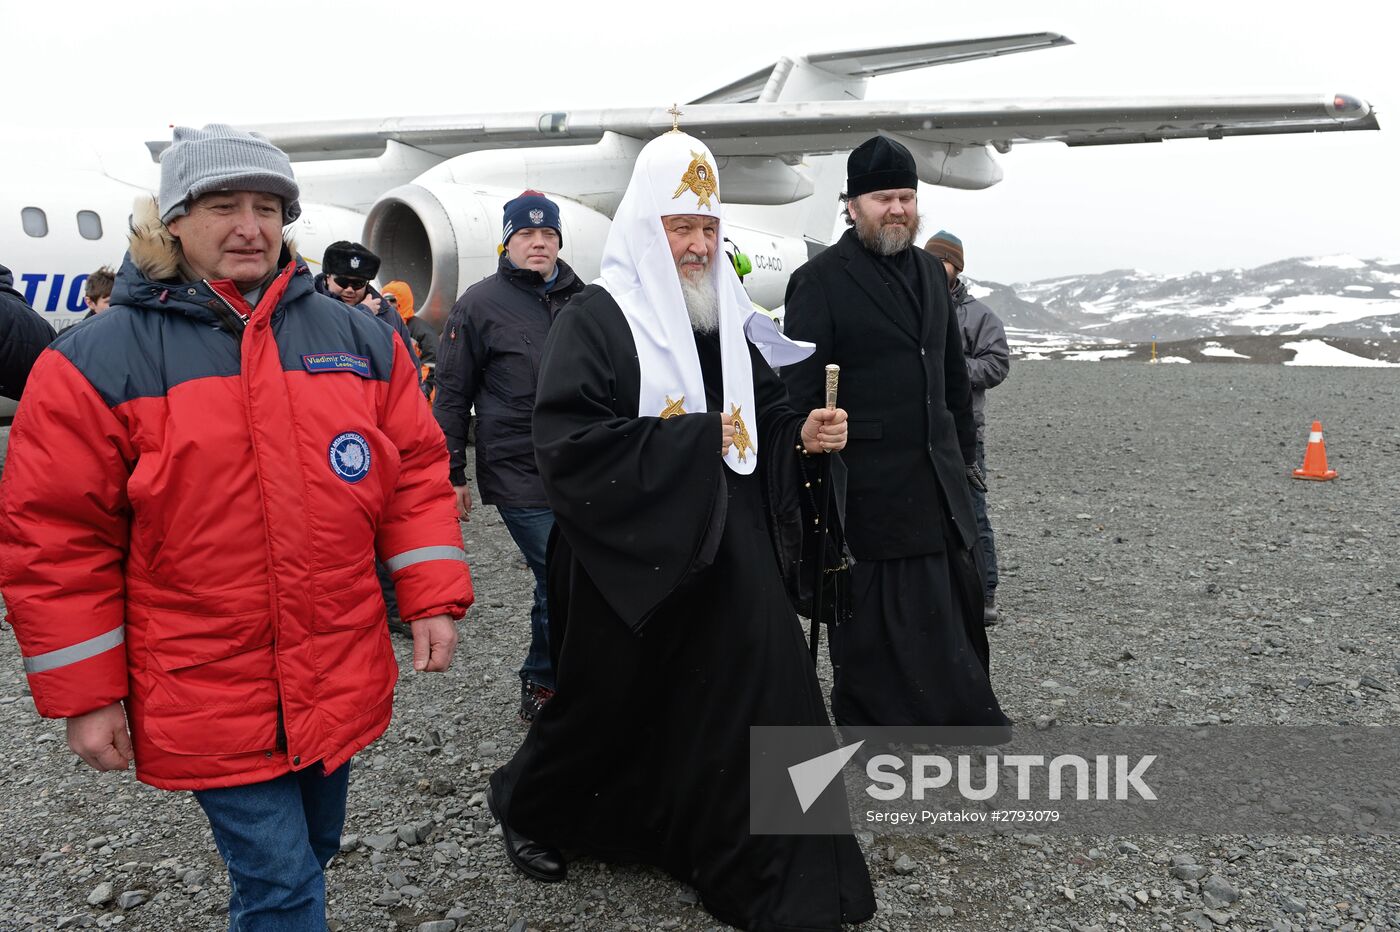 Patriarch Kirill of Moscow and All Russia visits Antarctica